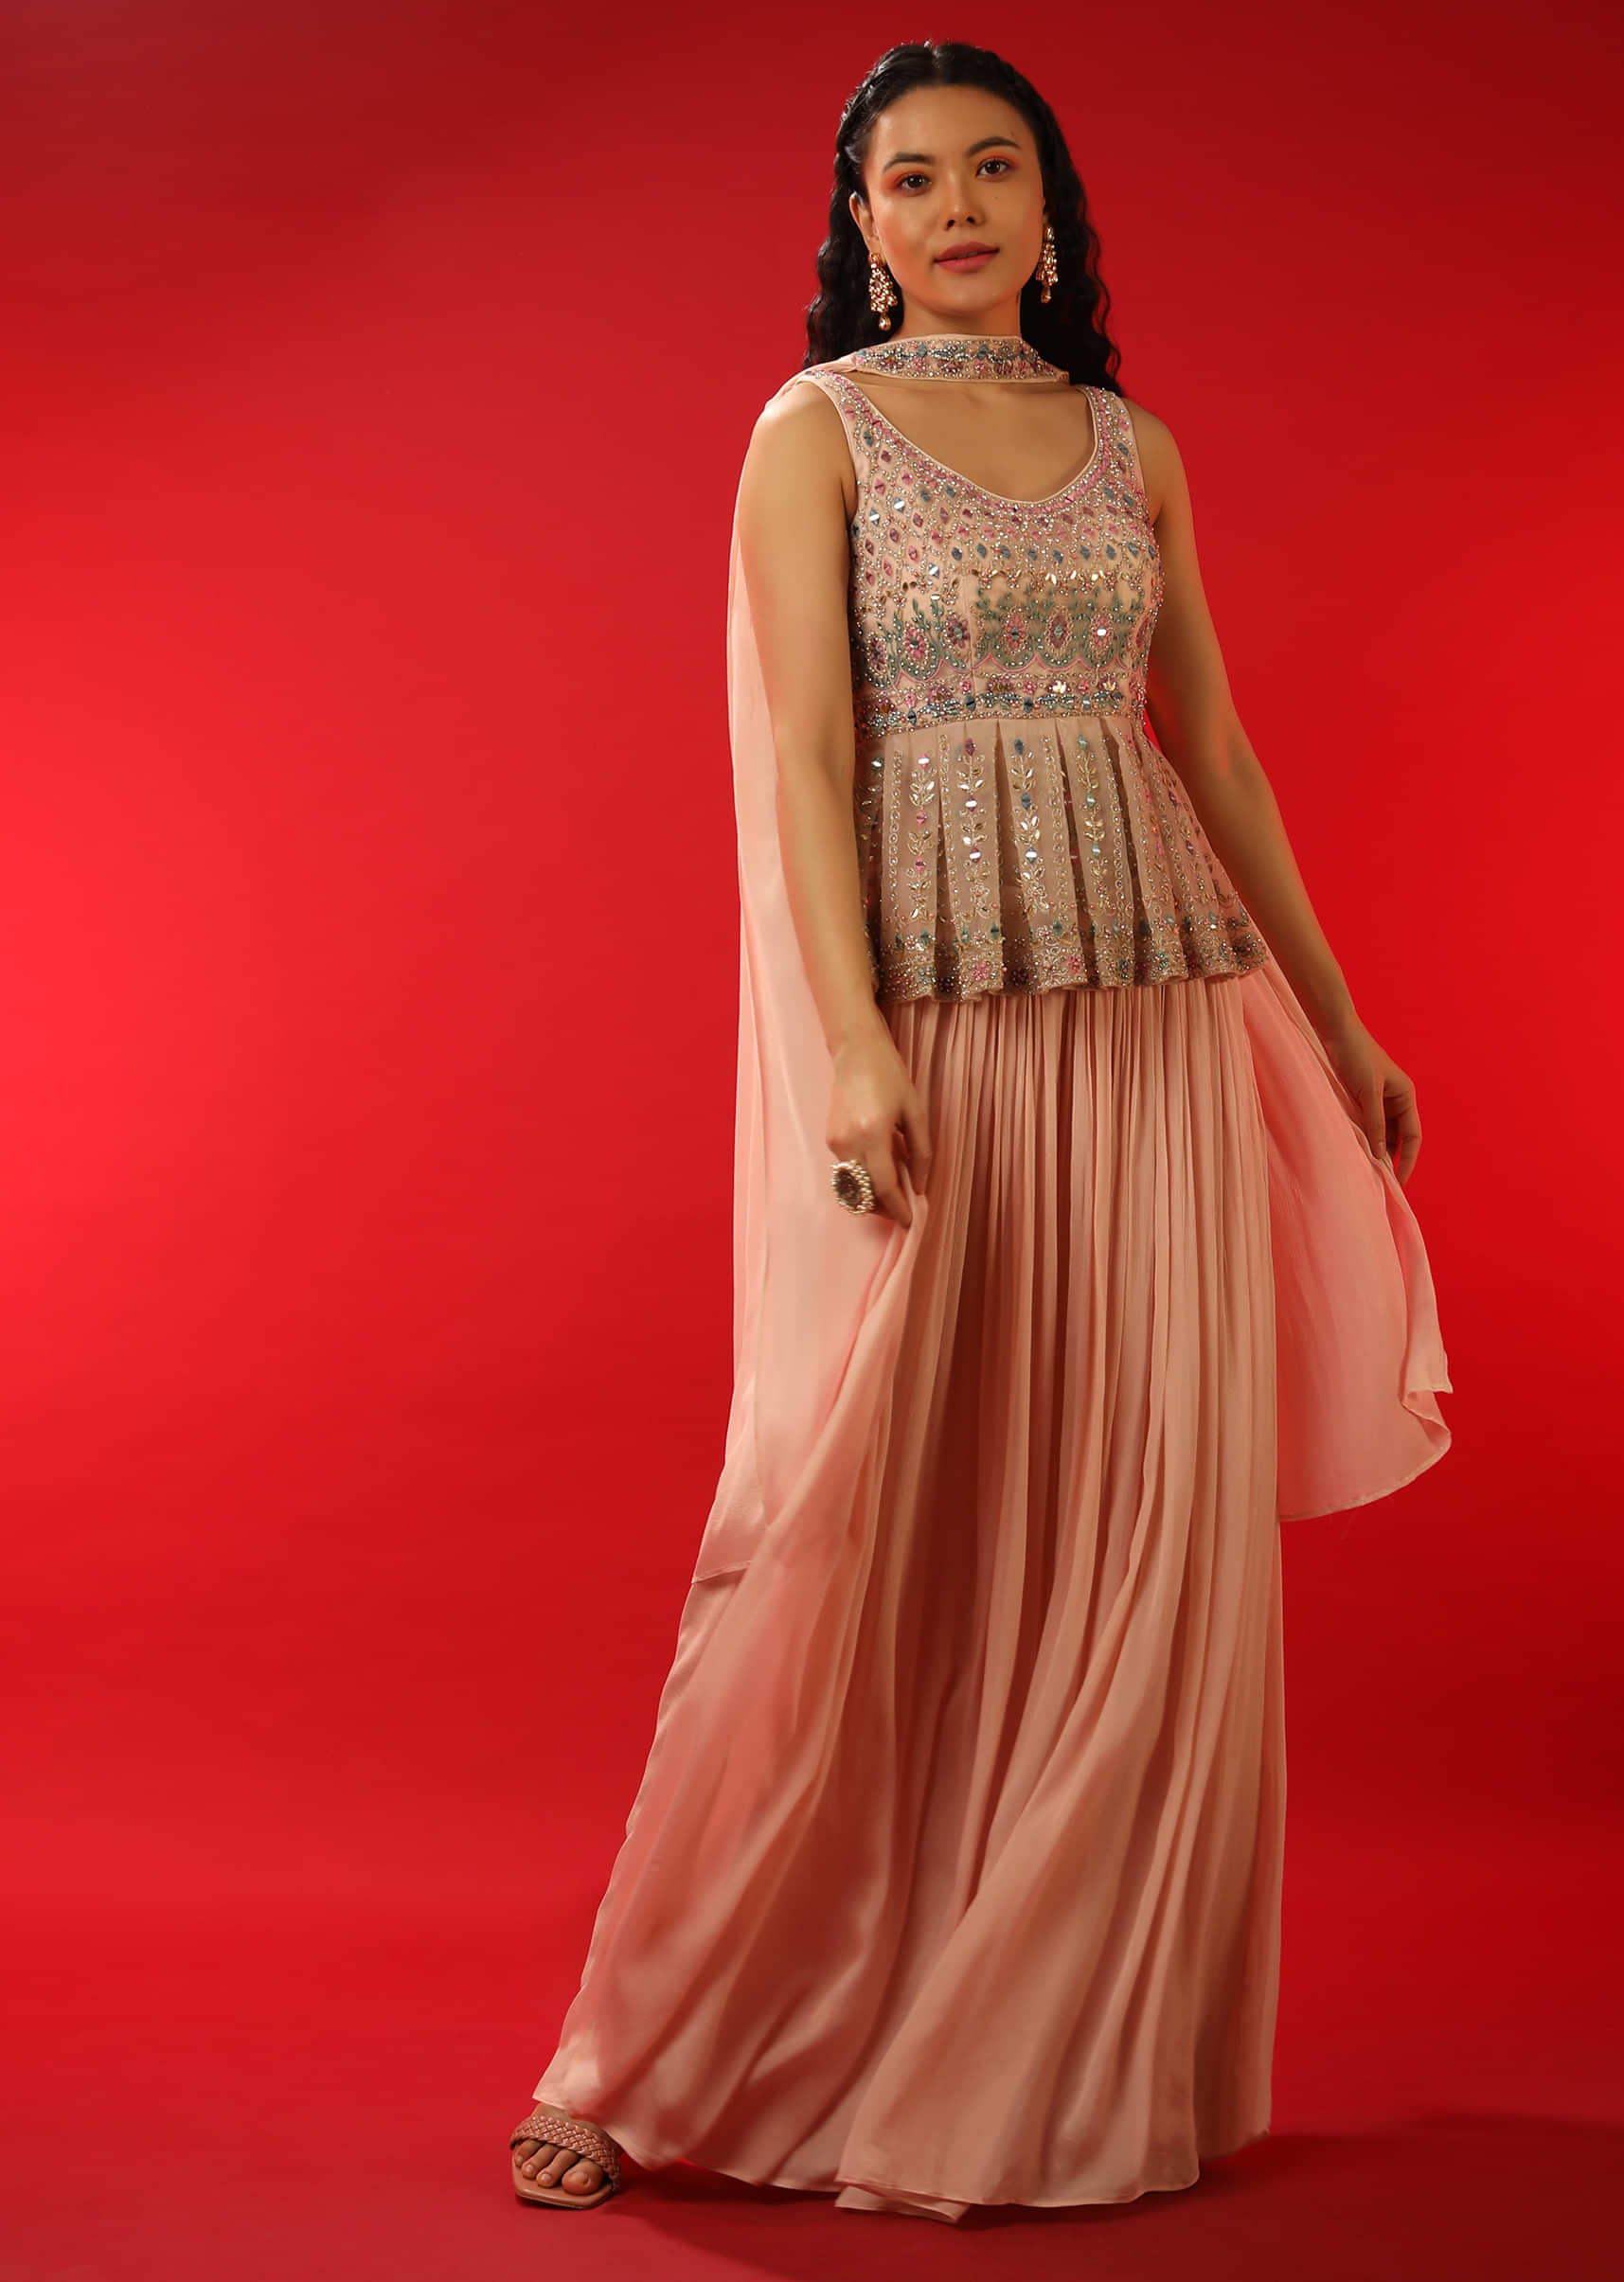 Powder Peach Palazzo And Peplum Suit With Multi Colored Resham And Mirror Abla Embroidered Floral Motifs  